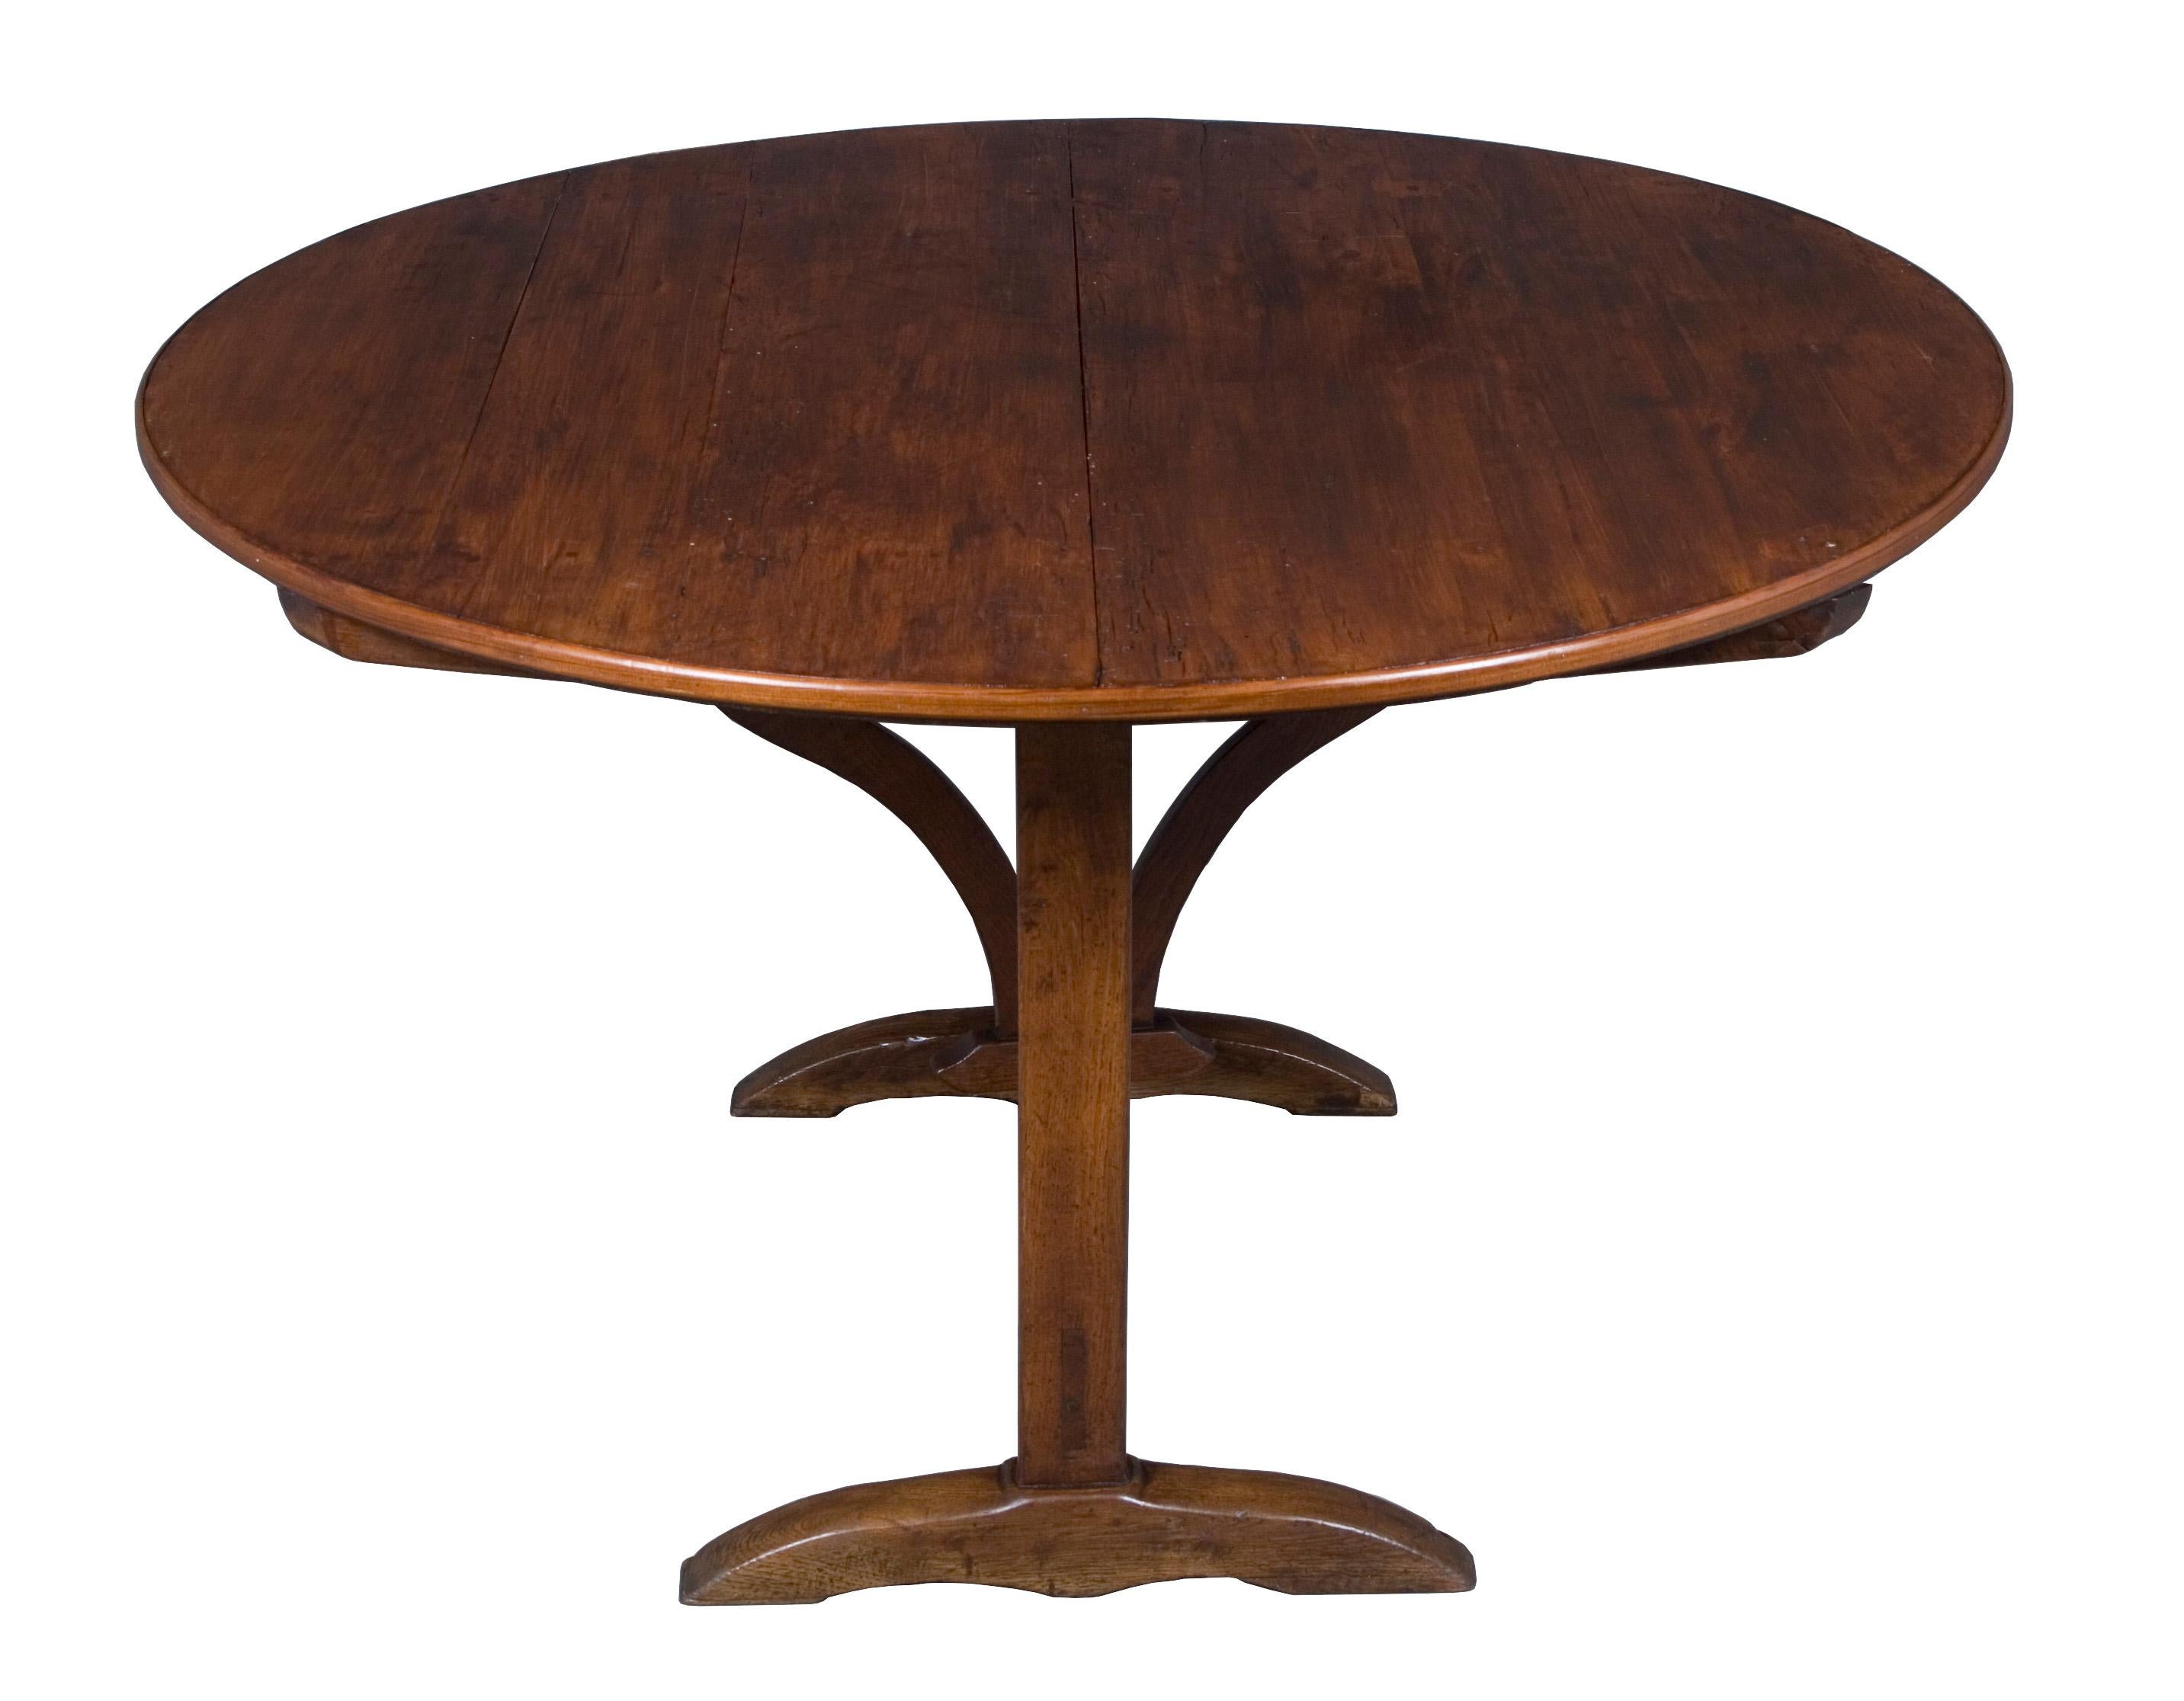 This unique Vigneron table is done with a cherry top on an oak base. It measures almost round at 46.25